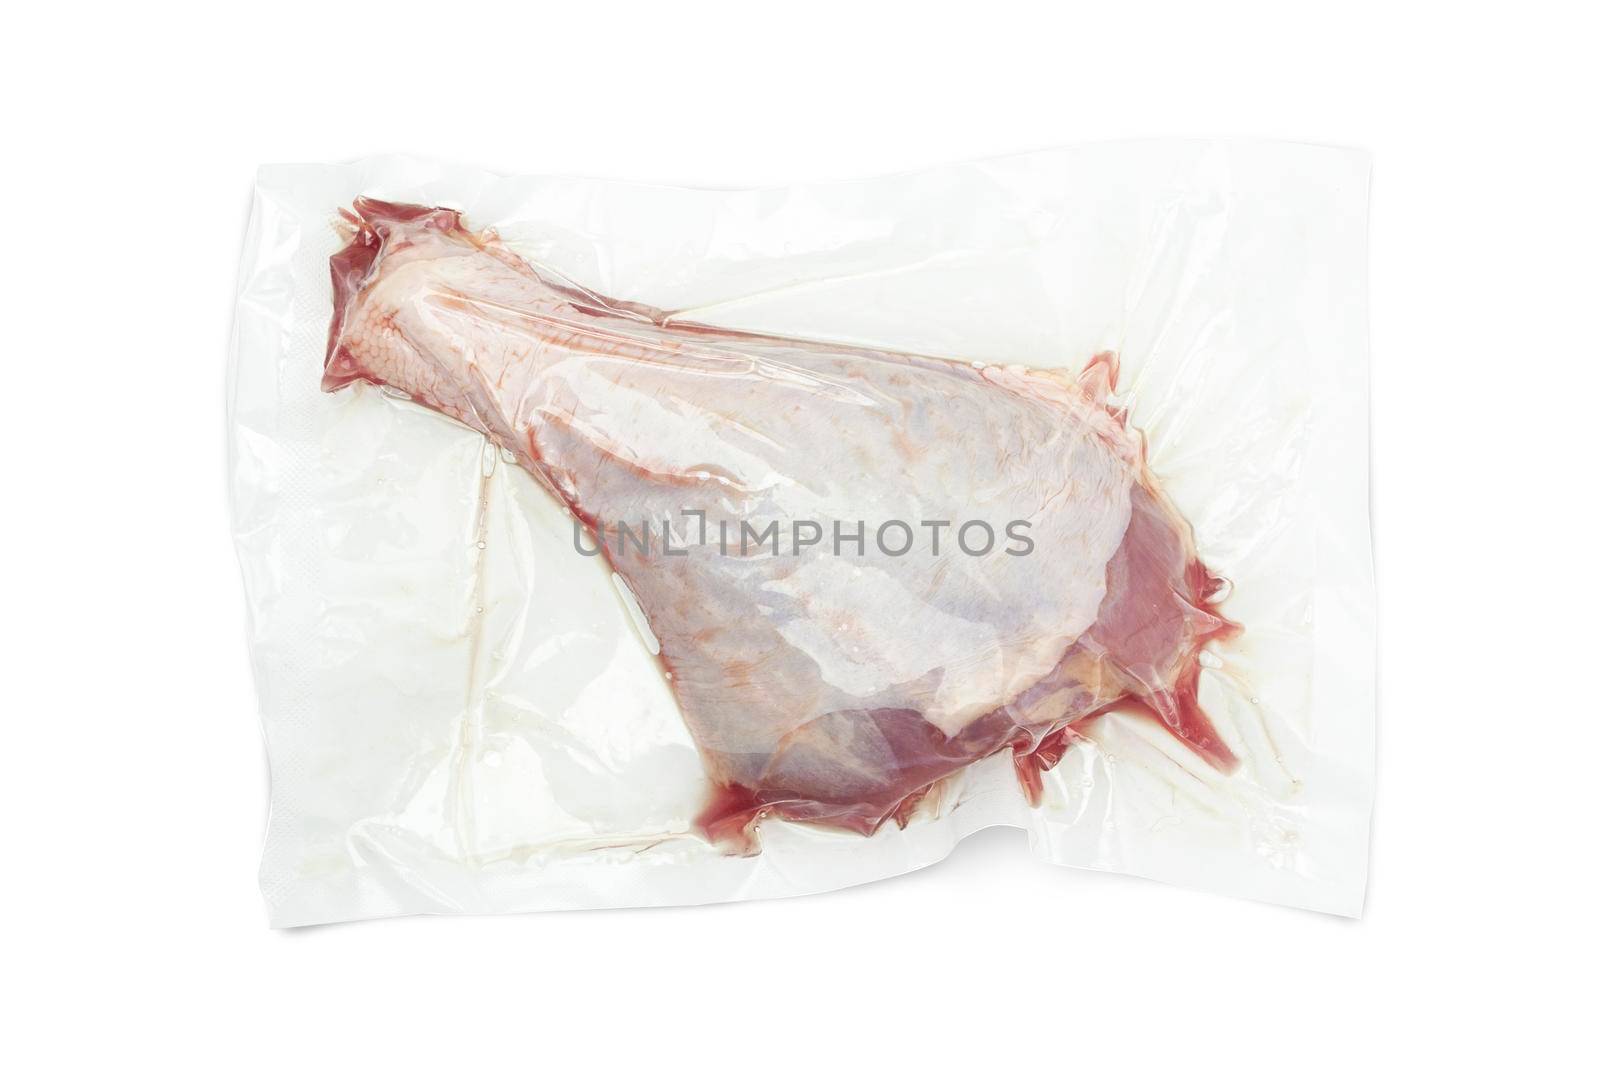 Vacuum packed turkey meat isolated on white background. Raw drumstick. With clippig path